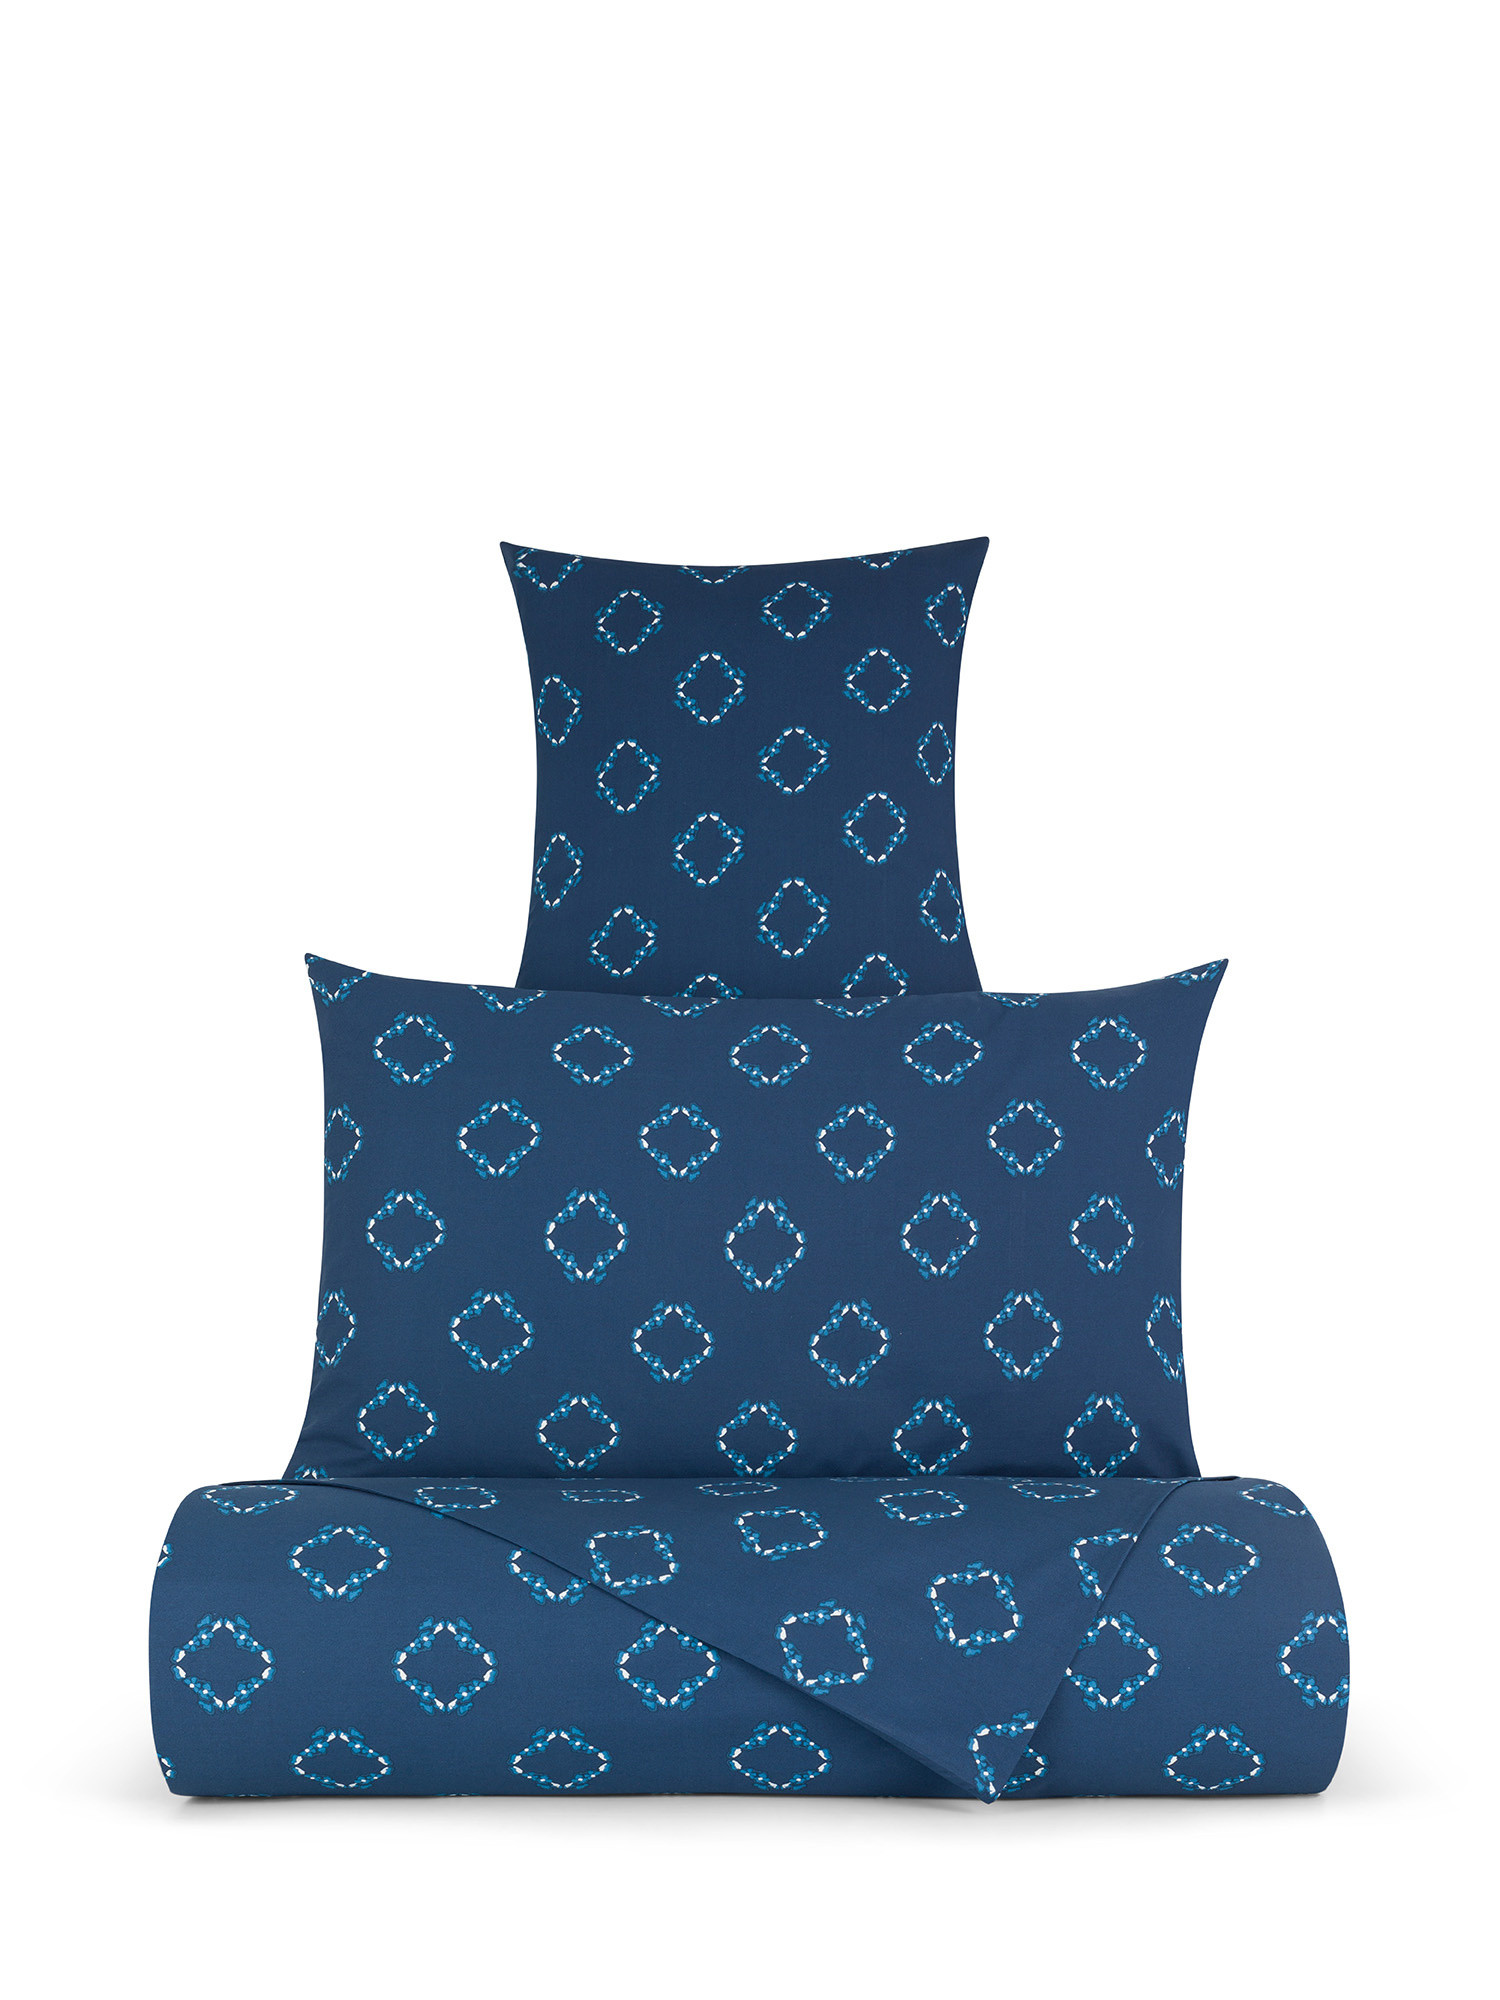 Printed cotton percale duvet cover, Blue, large image number 0